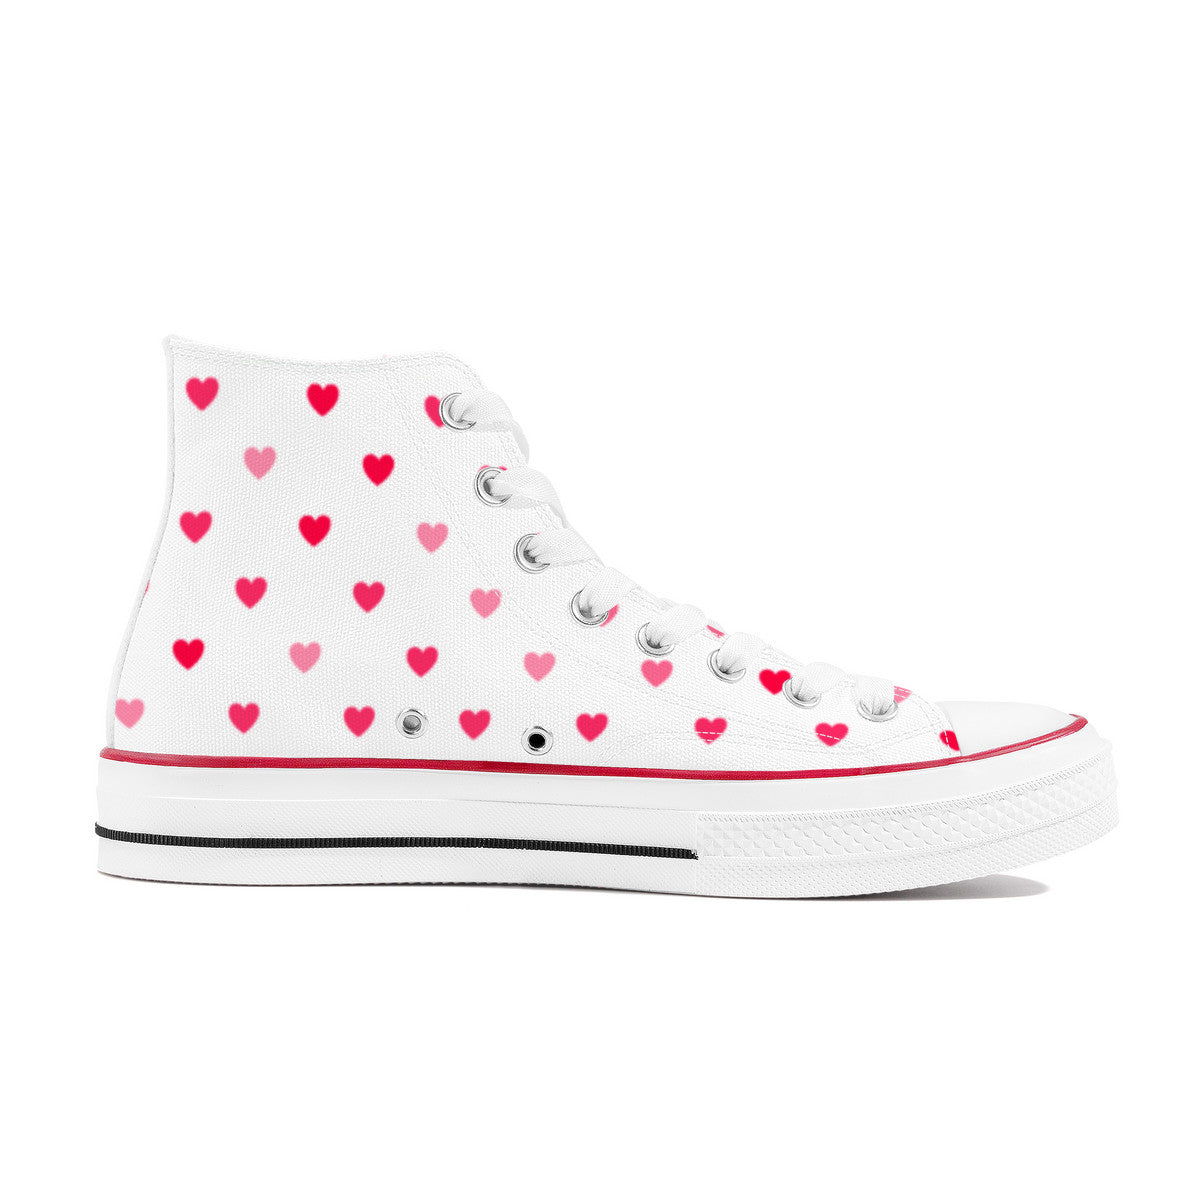 BT21 Tata High Top Canvas Sneakers